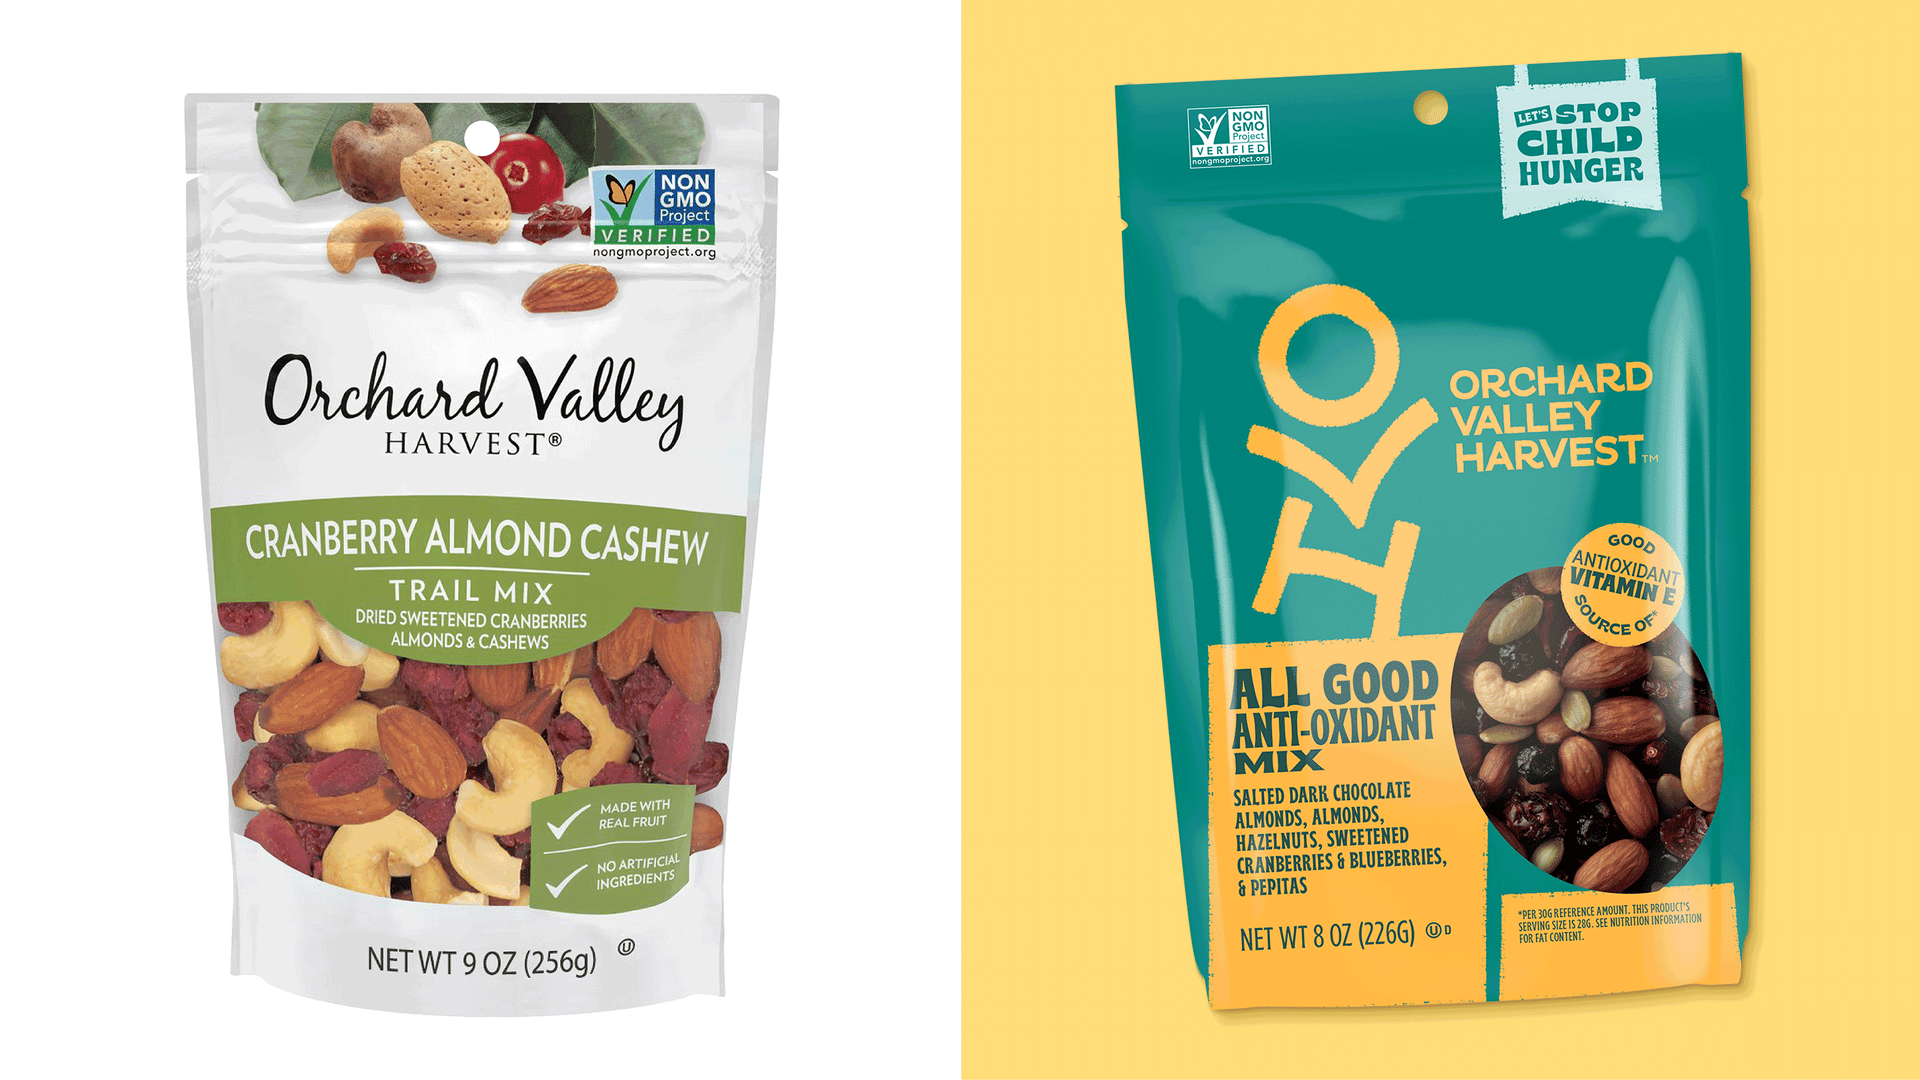 Orchard Valley Harvest - before and after redesigned packages